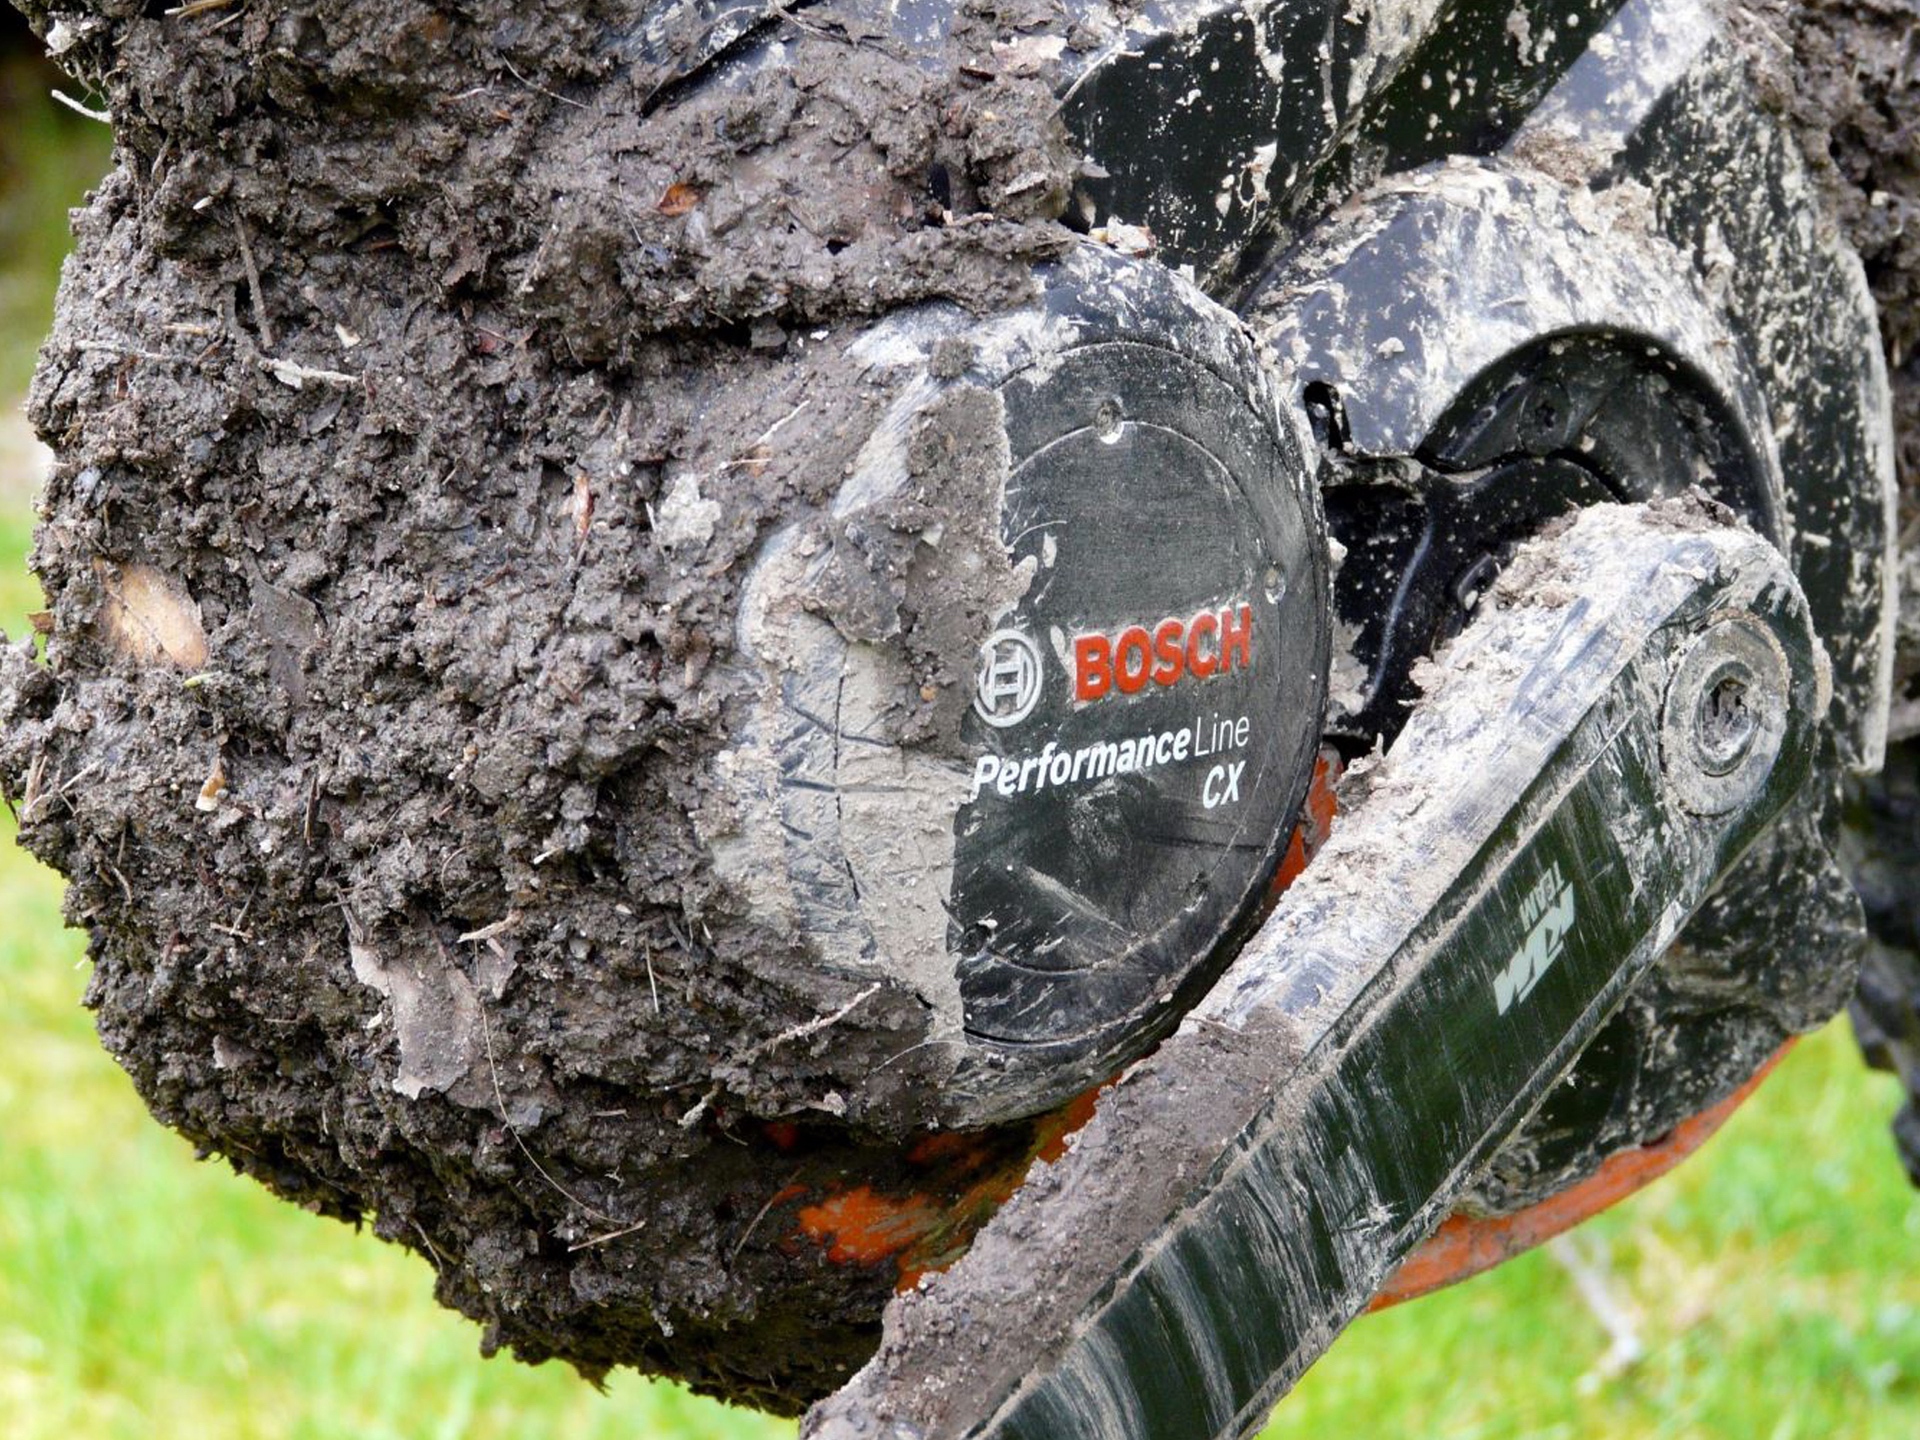 Close up shot of Bosch Performance Line mid-drive eBike motor covered in mud and dirt